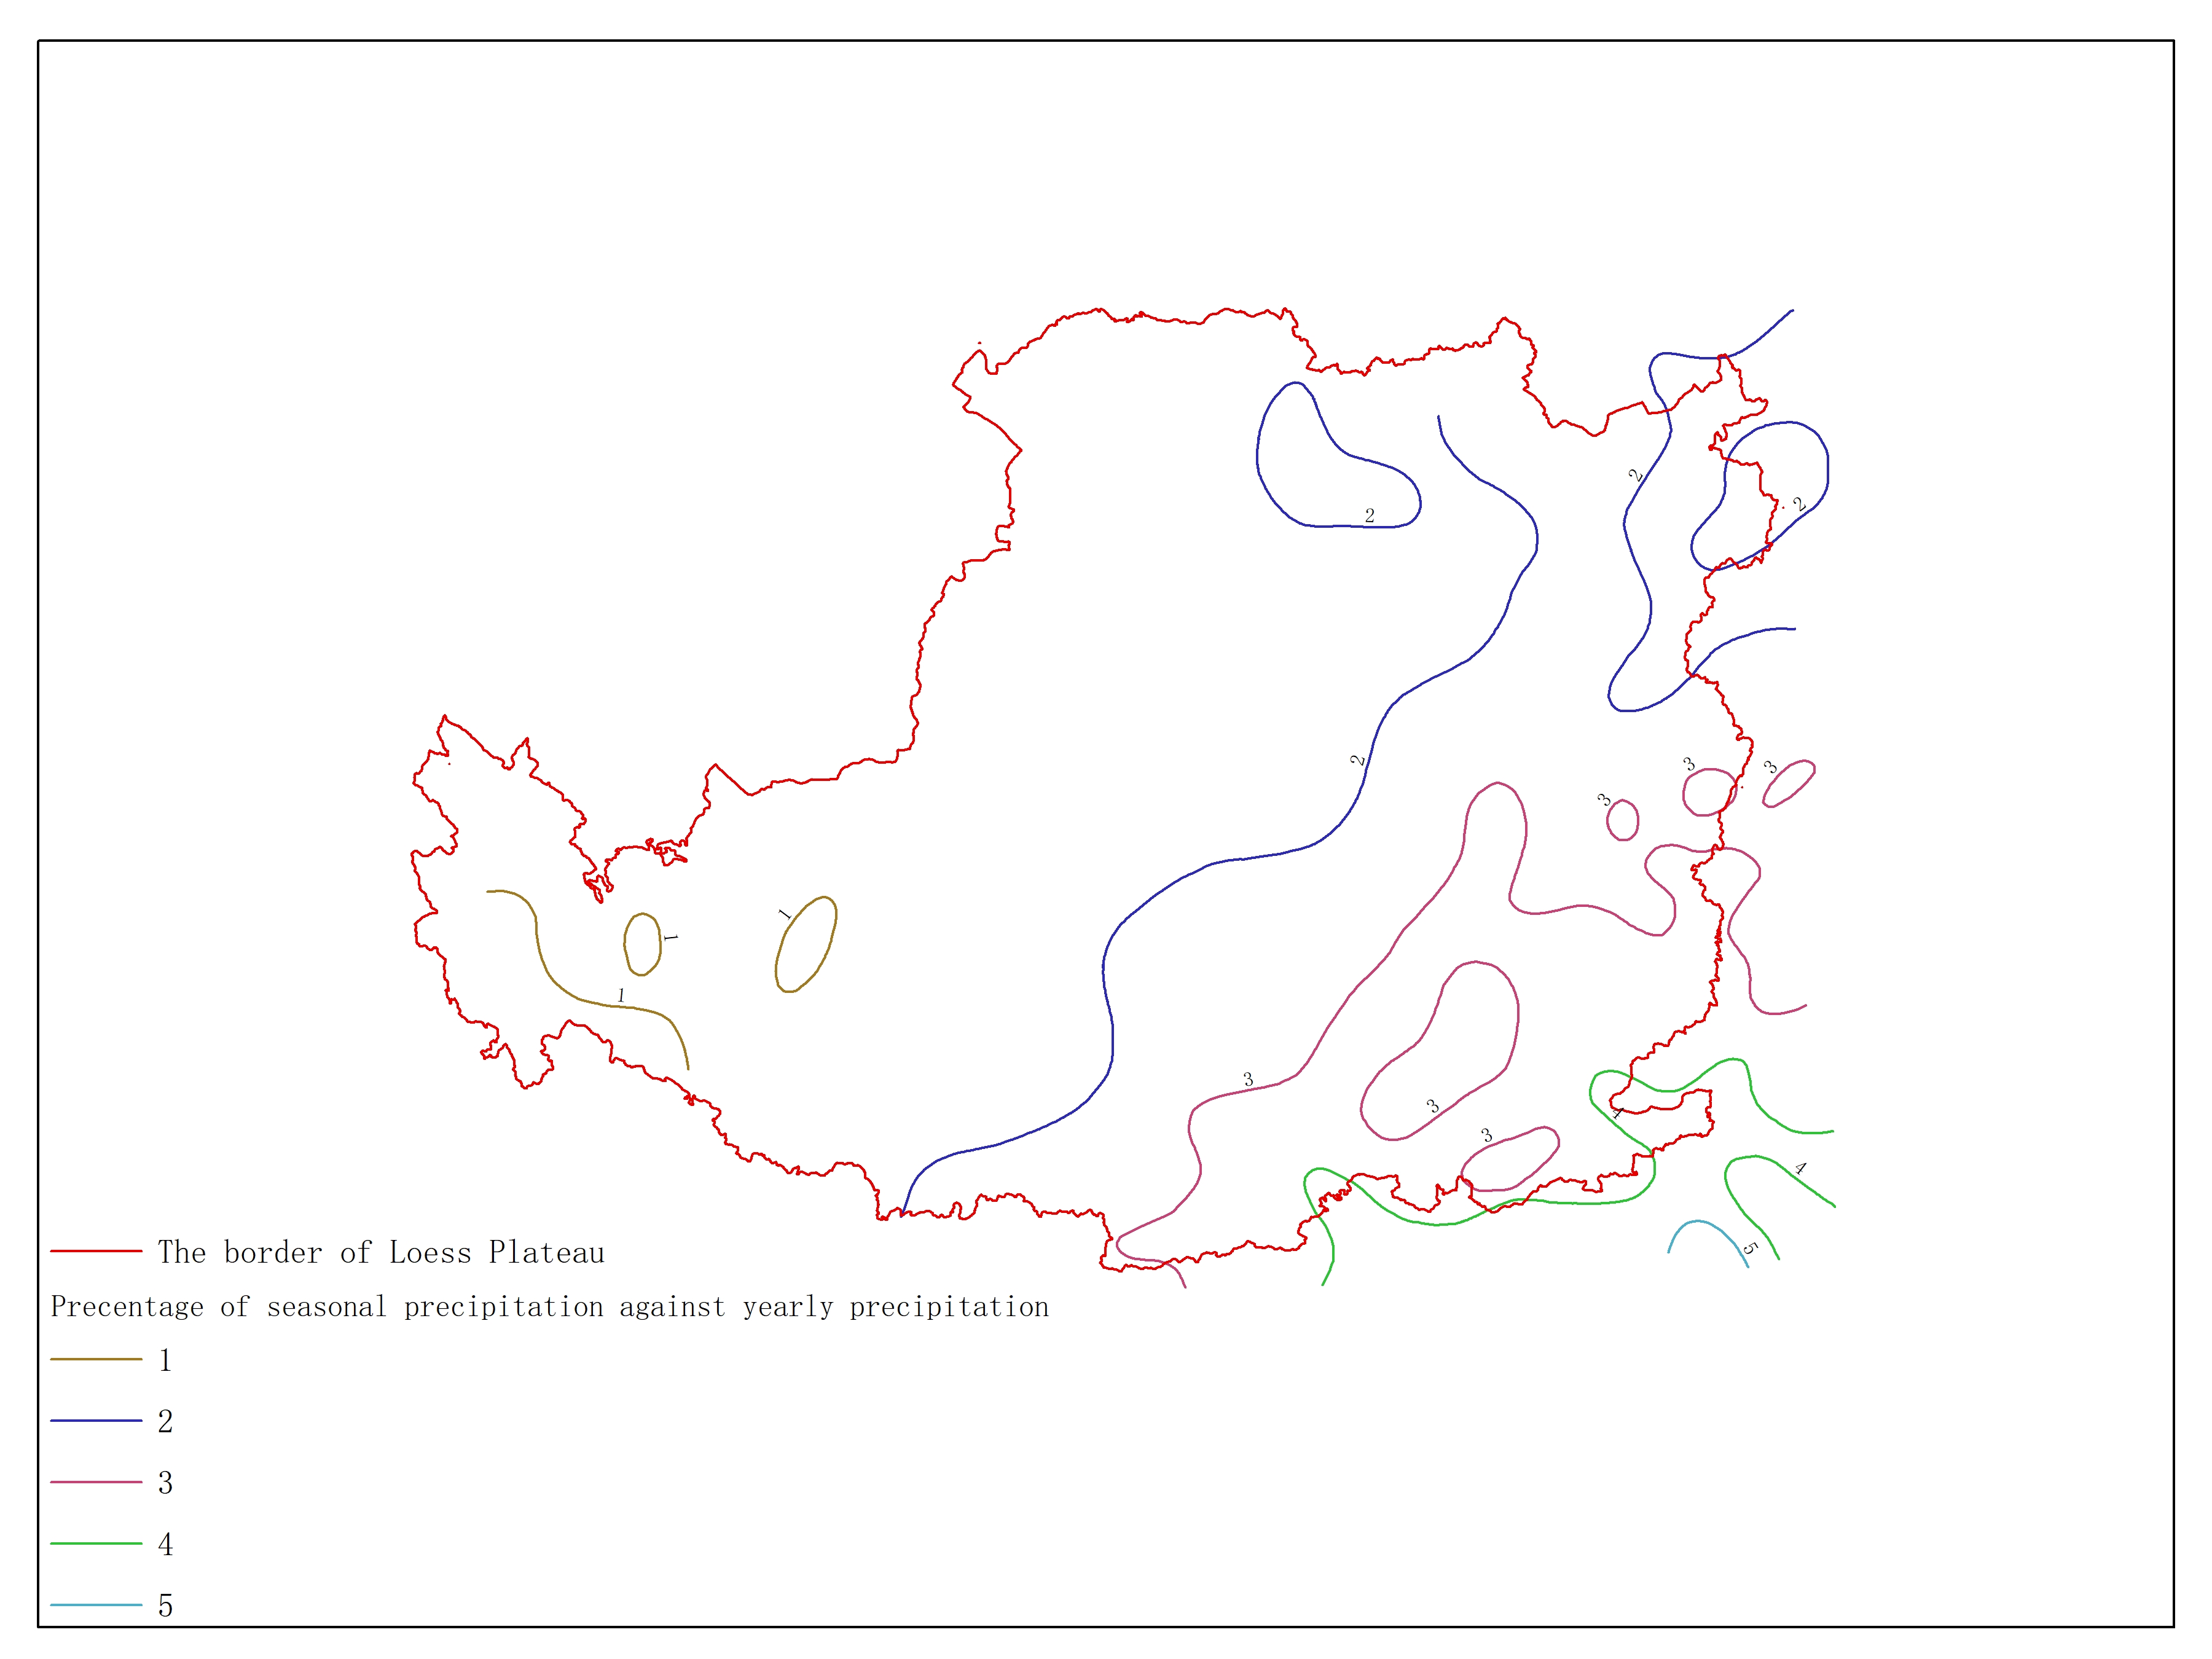 Agricultural climate resource atlas of Loess Plateau-Precentage of seasonal precipitation against yearly precipitation (December, January, February)